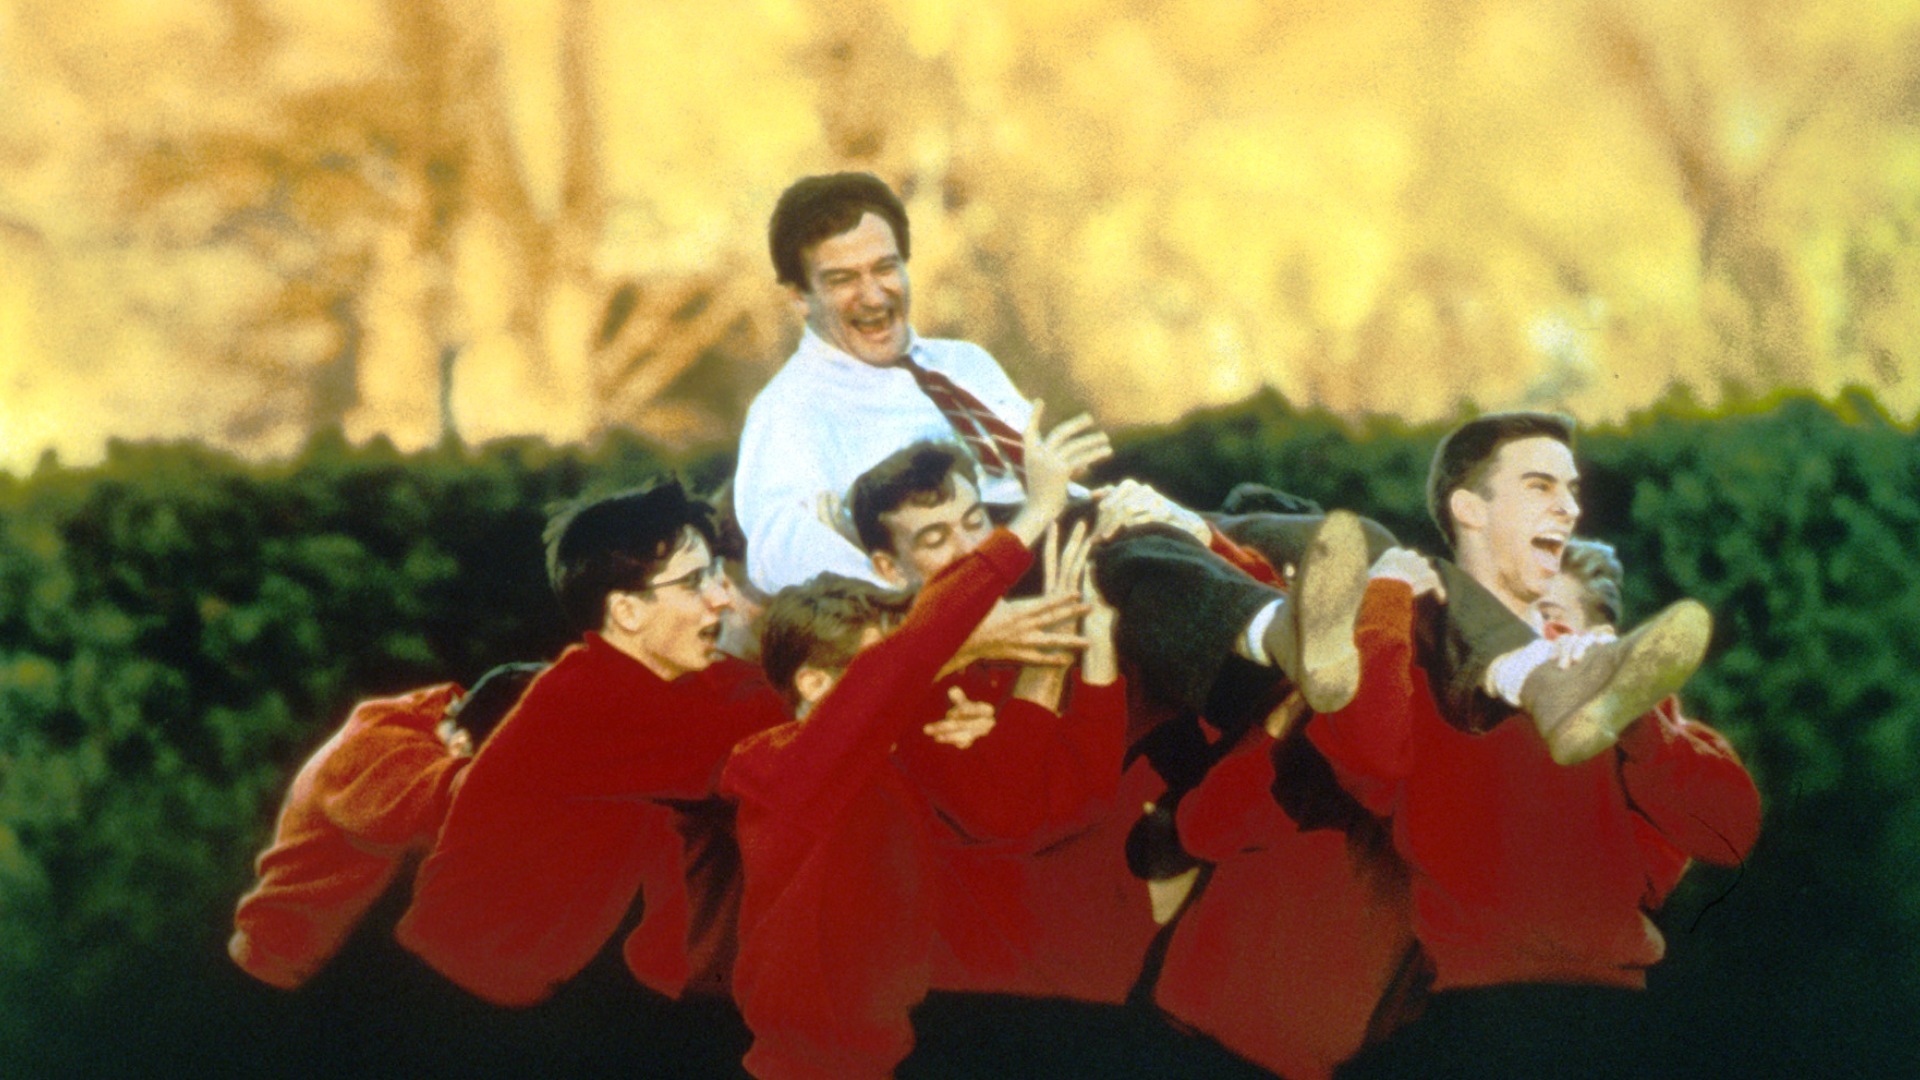 DEAD POETS SOCIETY Blu-ray Steelbook is coming to the UK